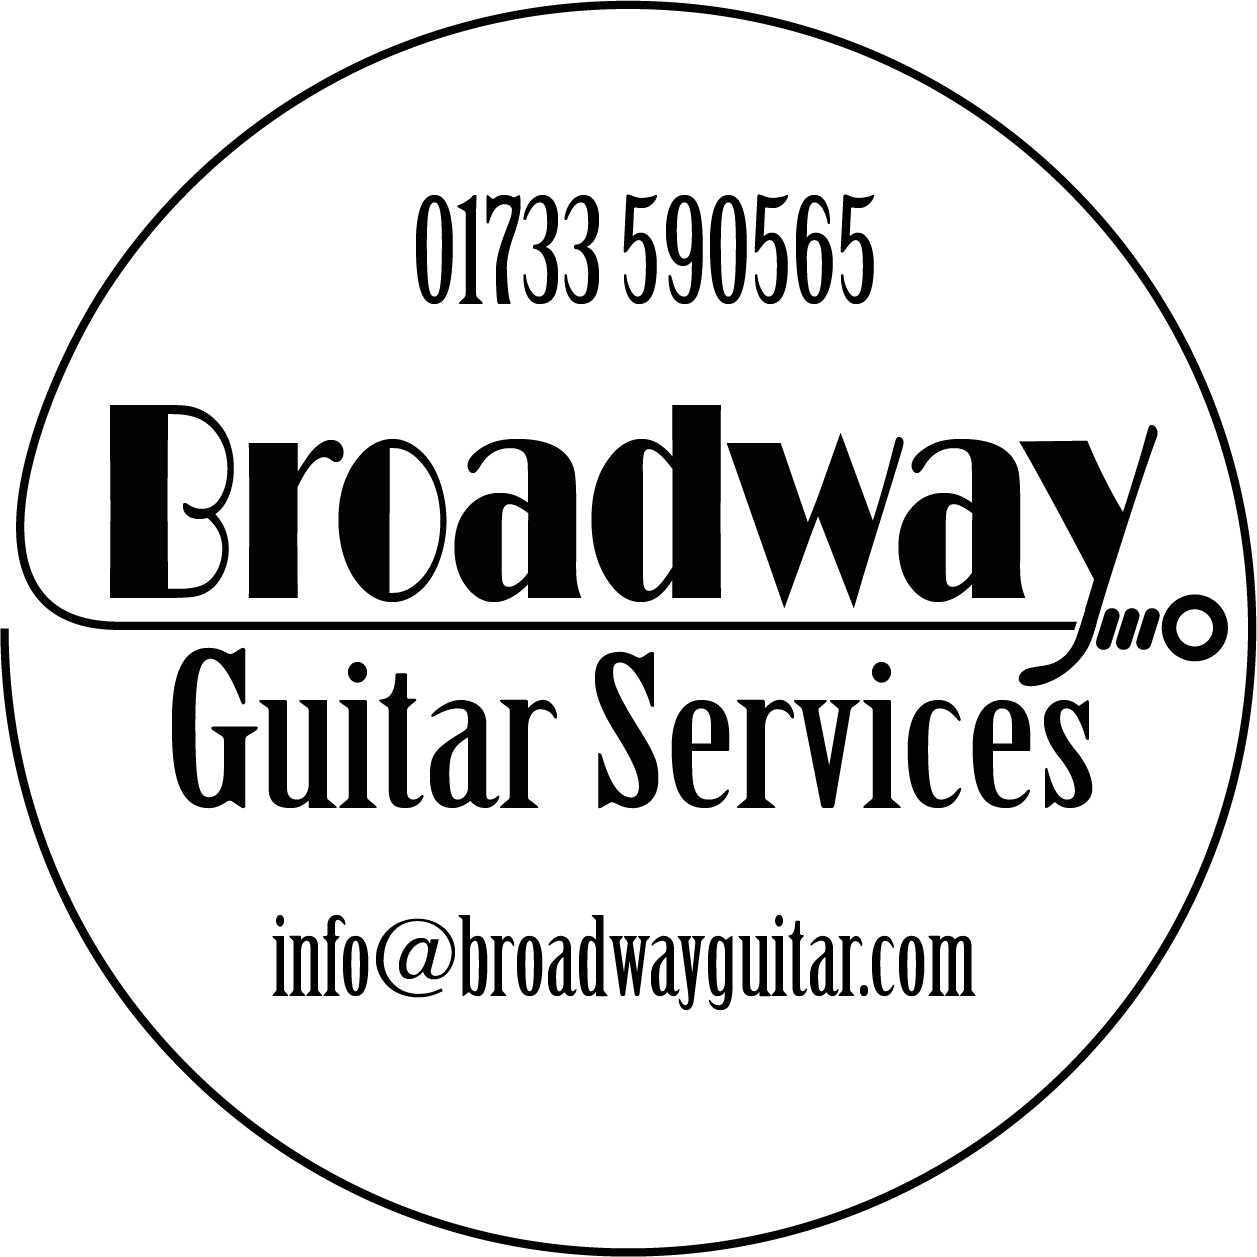 Broadway Guitar Services